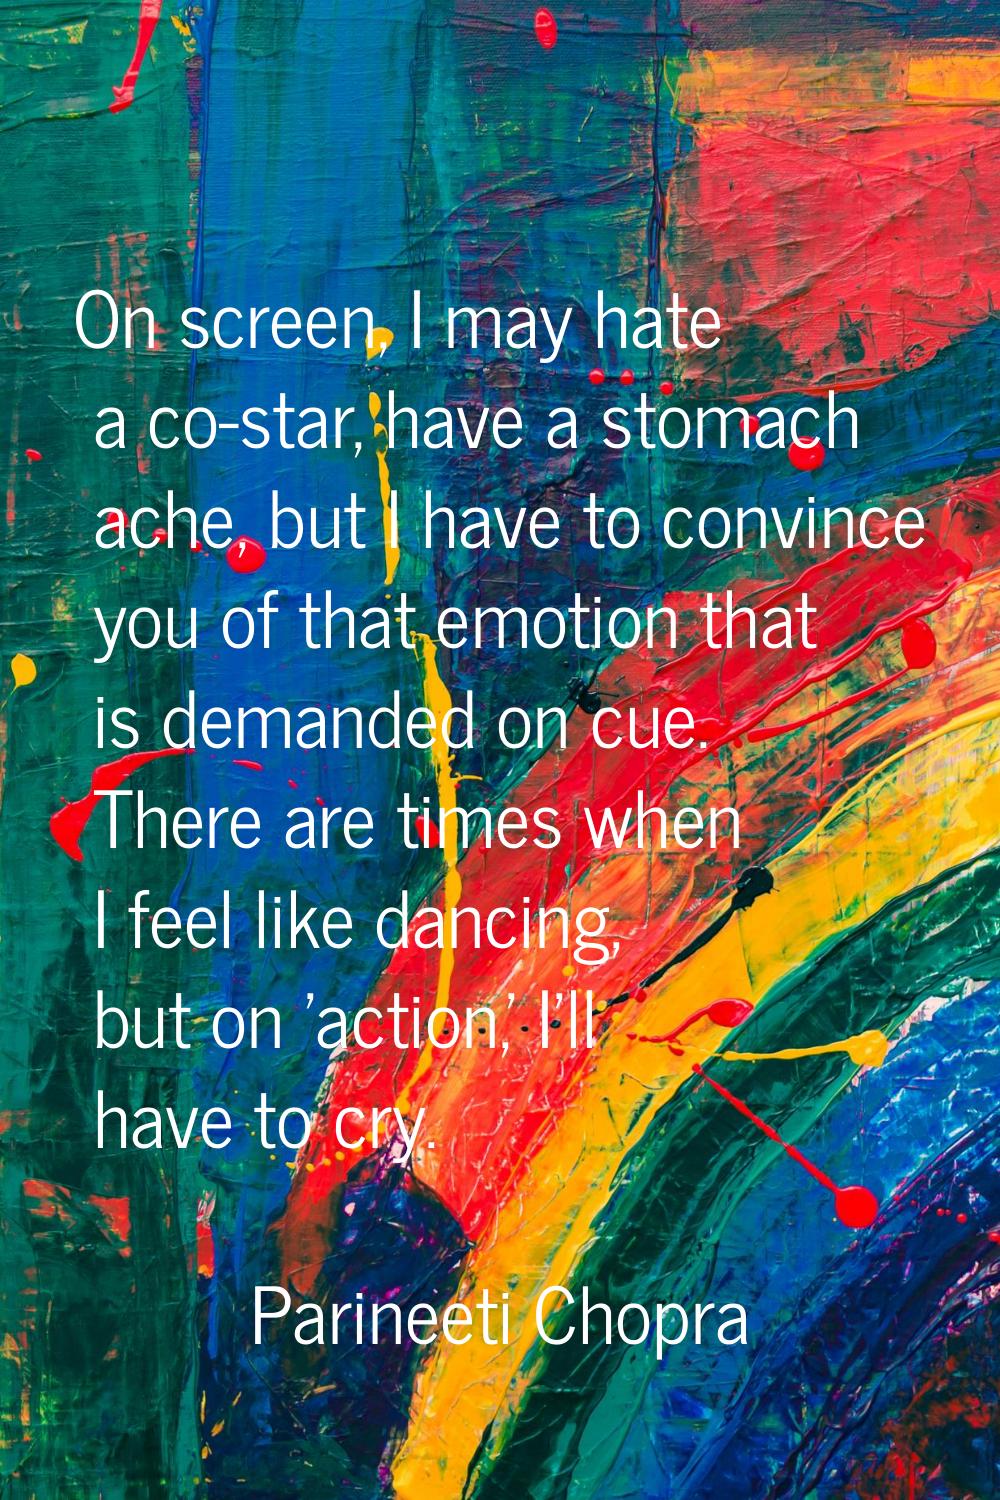 On screen, I may hate a co-star, have a stomach ache, but I have to convince you of that emotion th